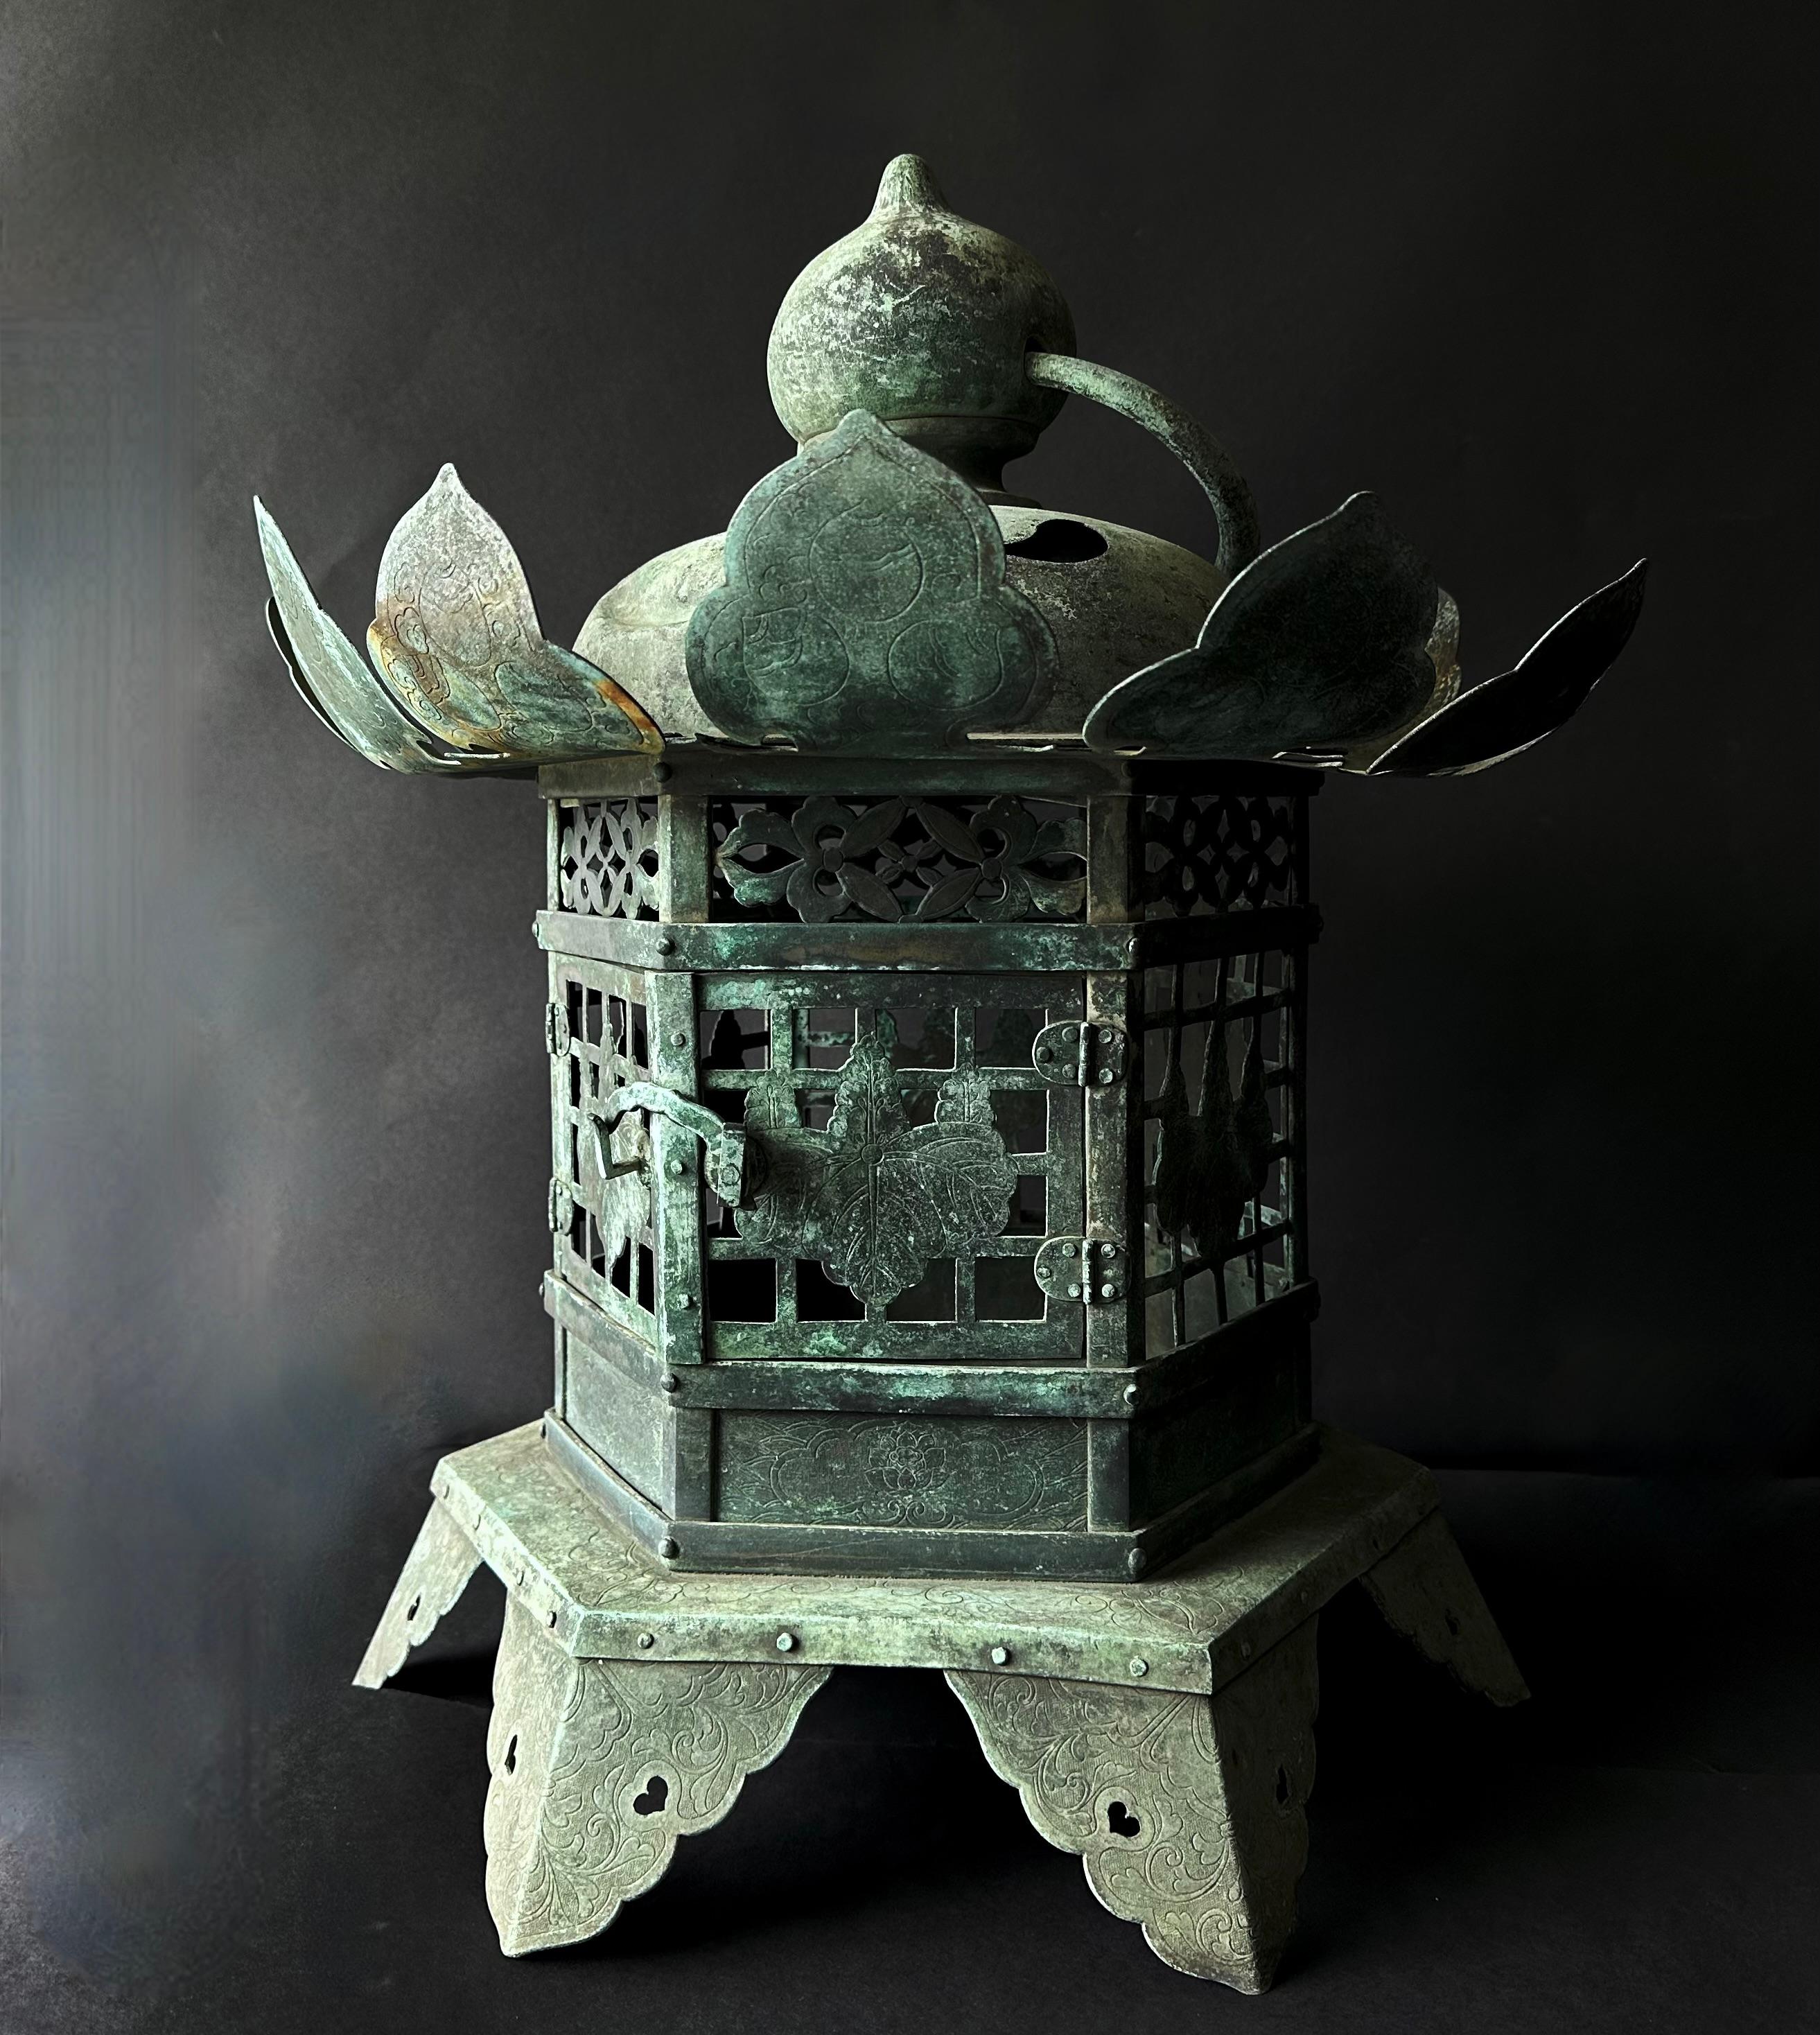 Exemplifying the grandeur of the Edo period, this substantial bronze Buddhist temple lantern is a relic steeped in both imperial provenance and spiritual significance. Circa 18th century, its surface is intricately adorned with motifs that are as